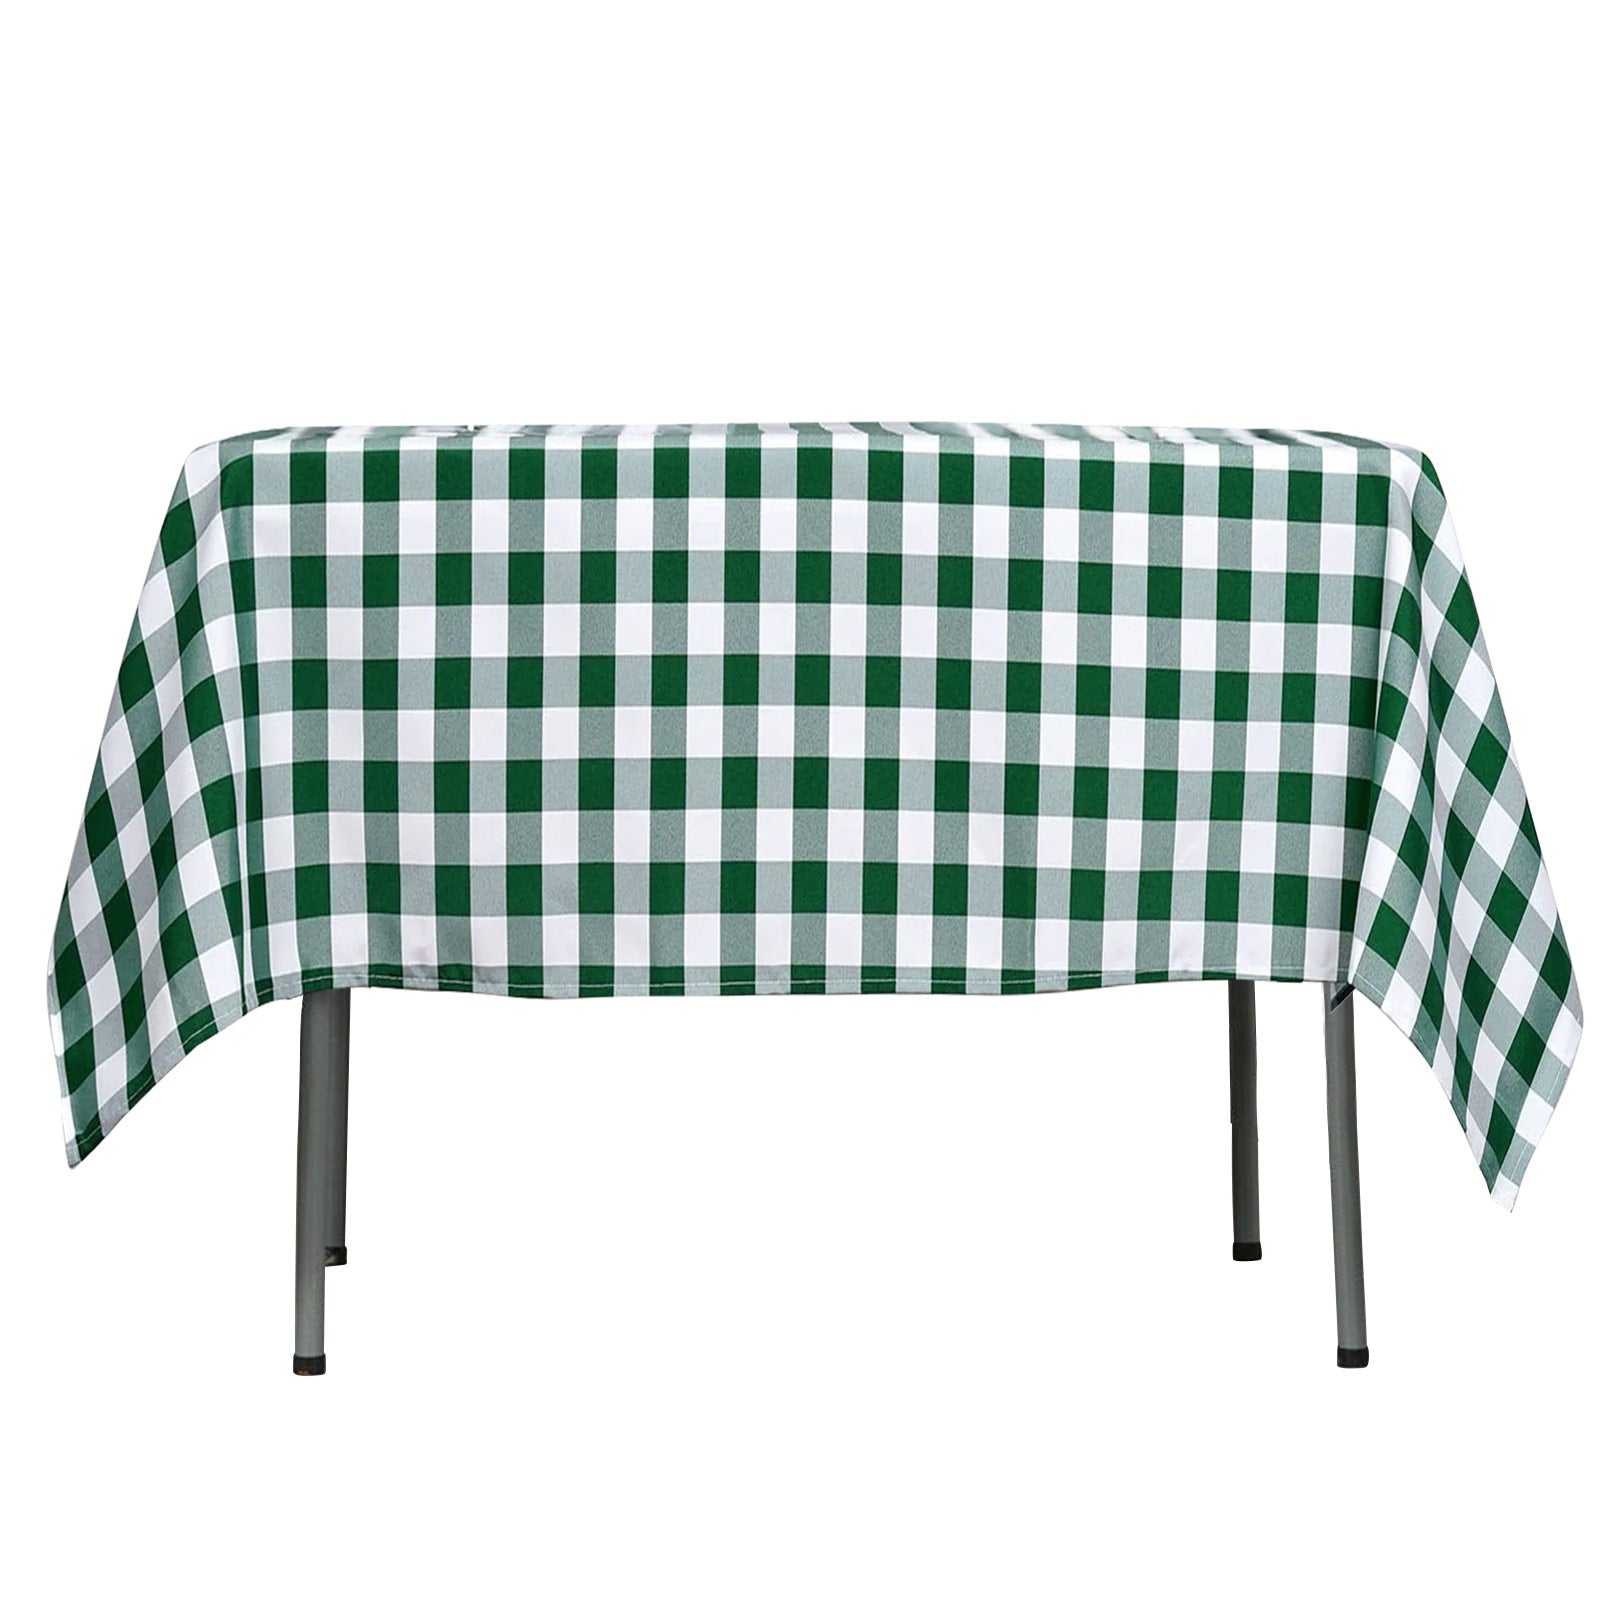 Square Checkered Tablecloth, Gingham Tablecloths